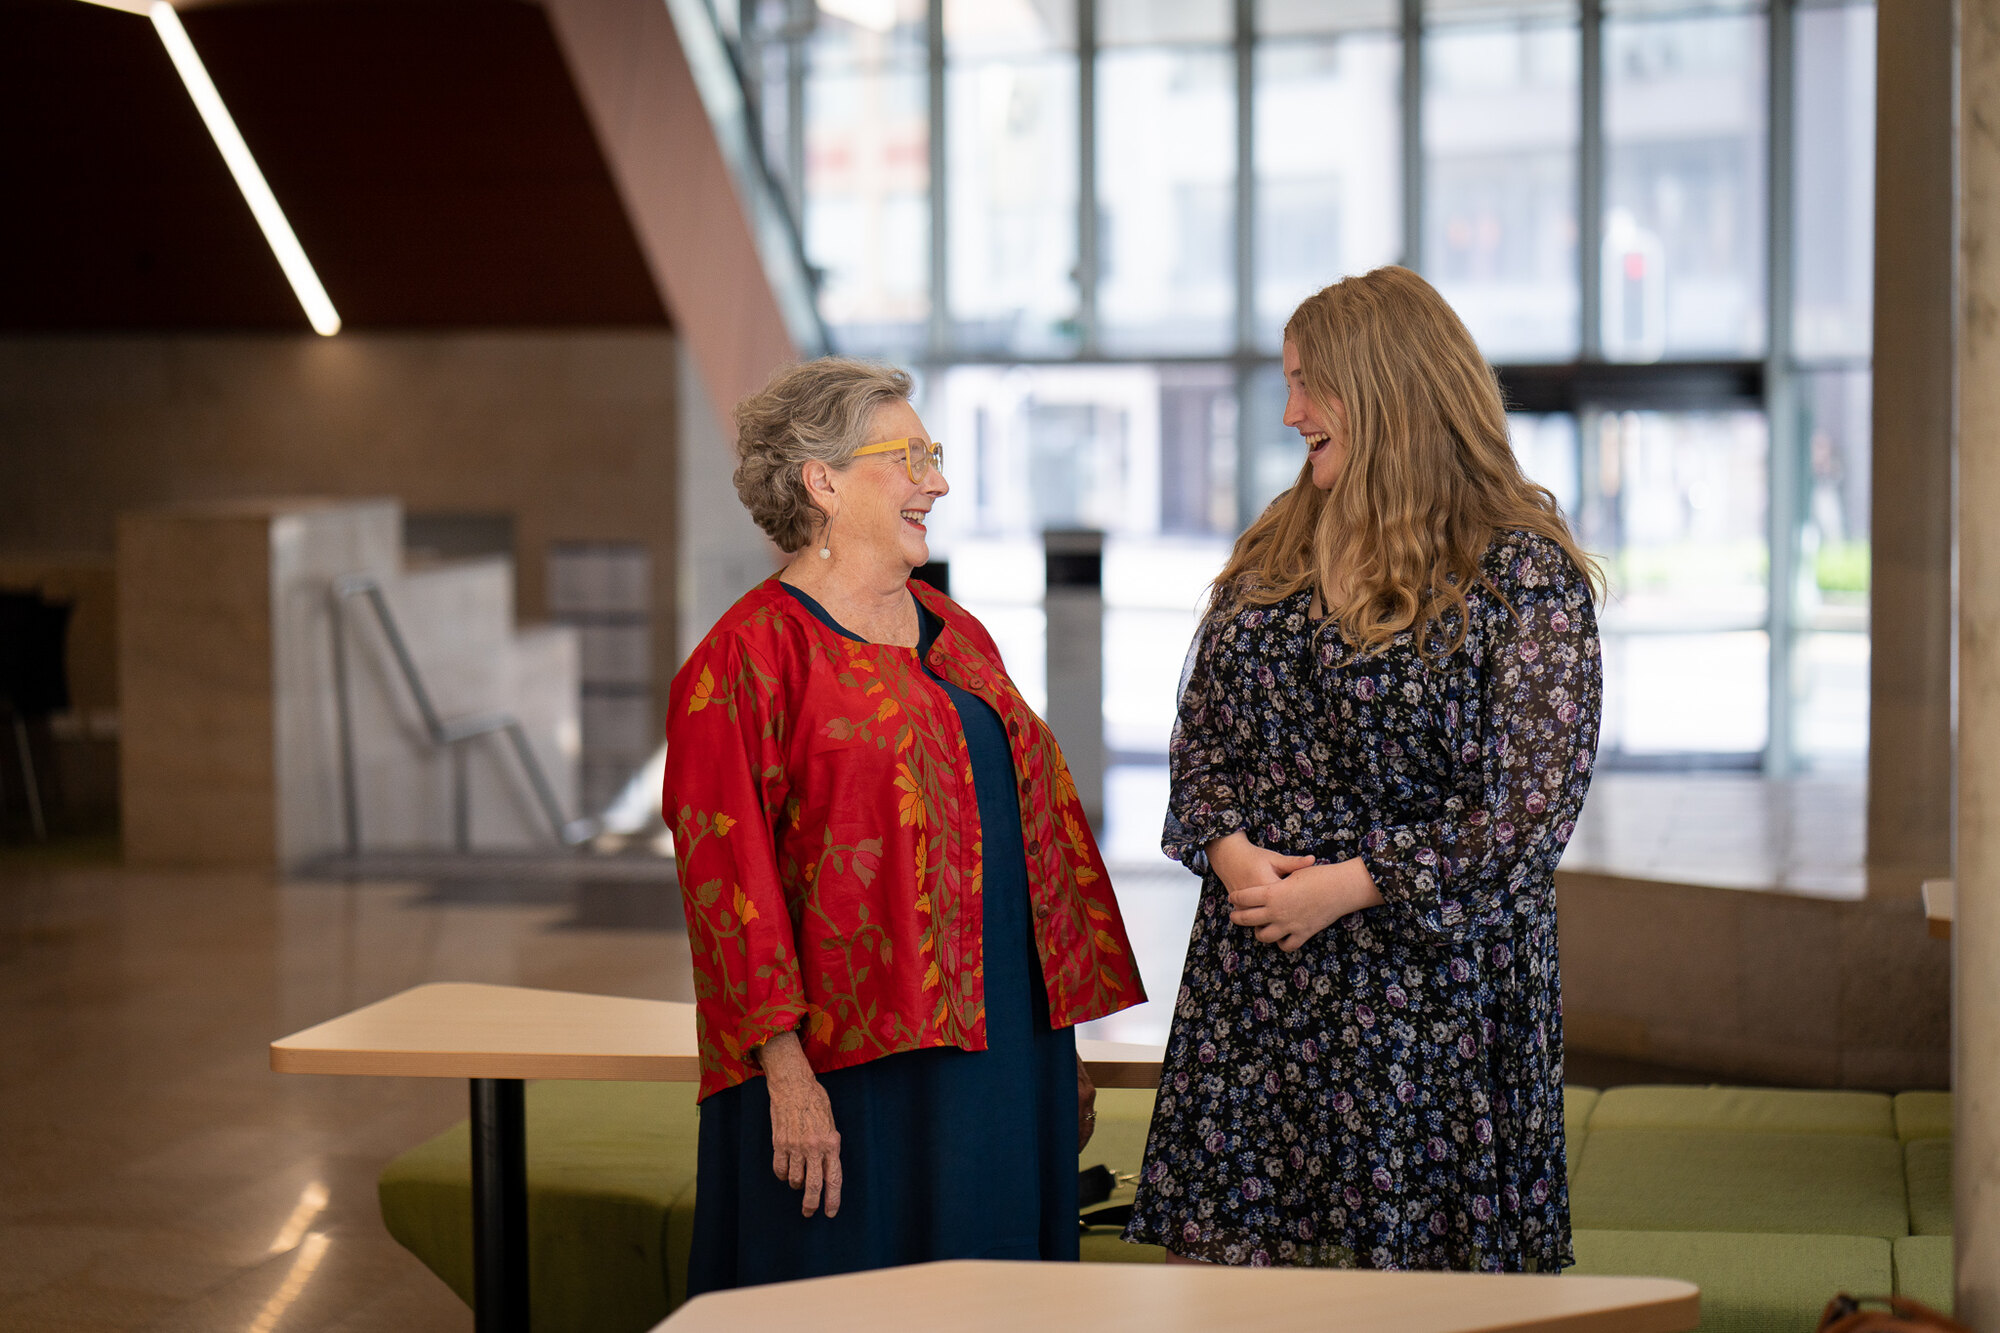 Research Professor Roberta Ryan chatting with a smiling and happy student, Emma Dubos